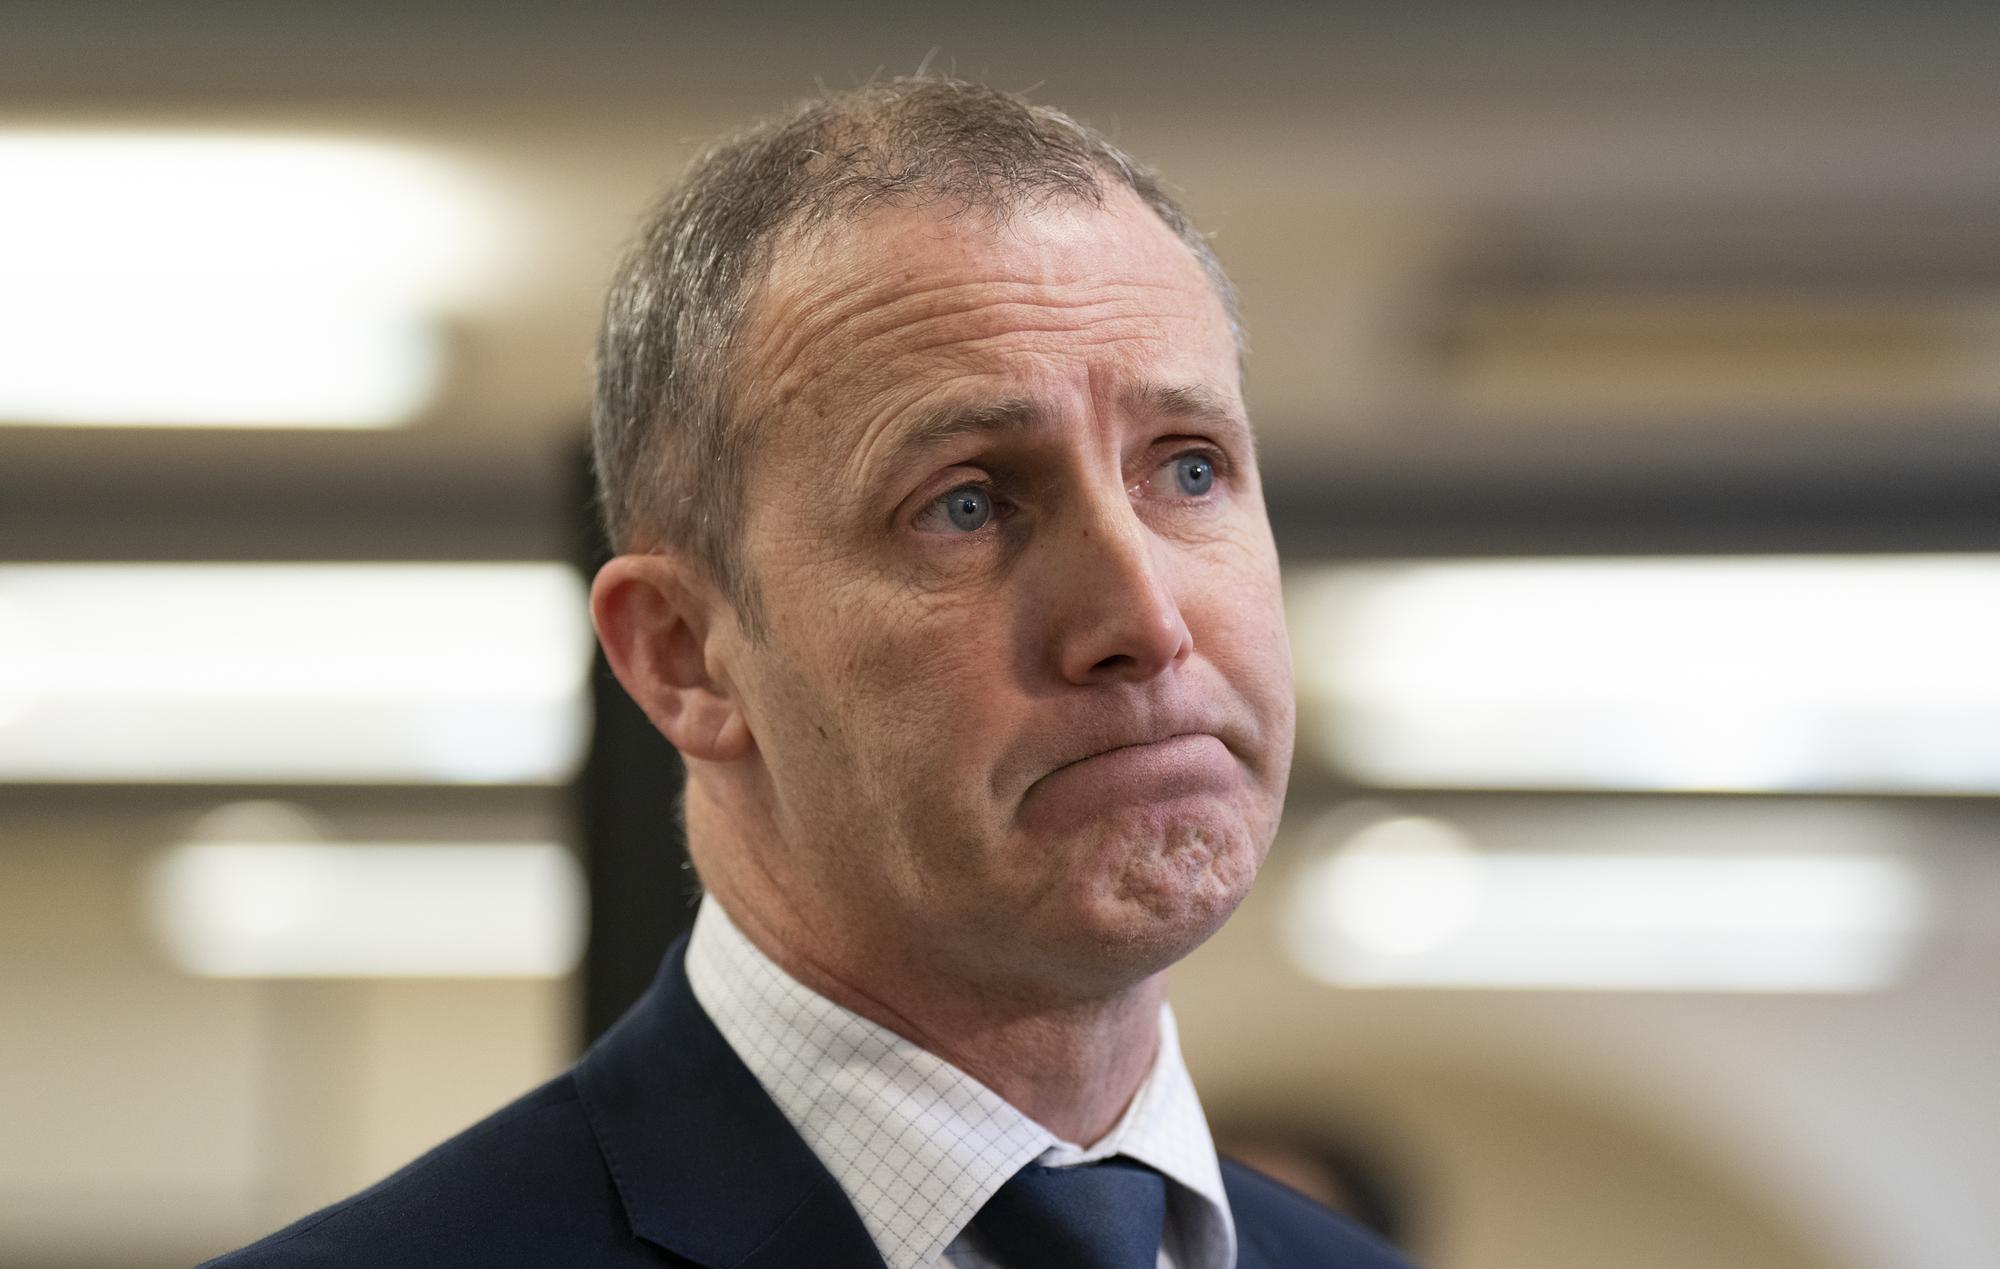 michael matheson's resignation over ipad expenses scandal is too late to be called honourable – scotsman comment